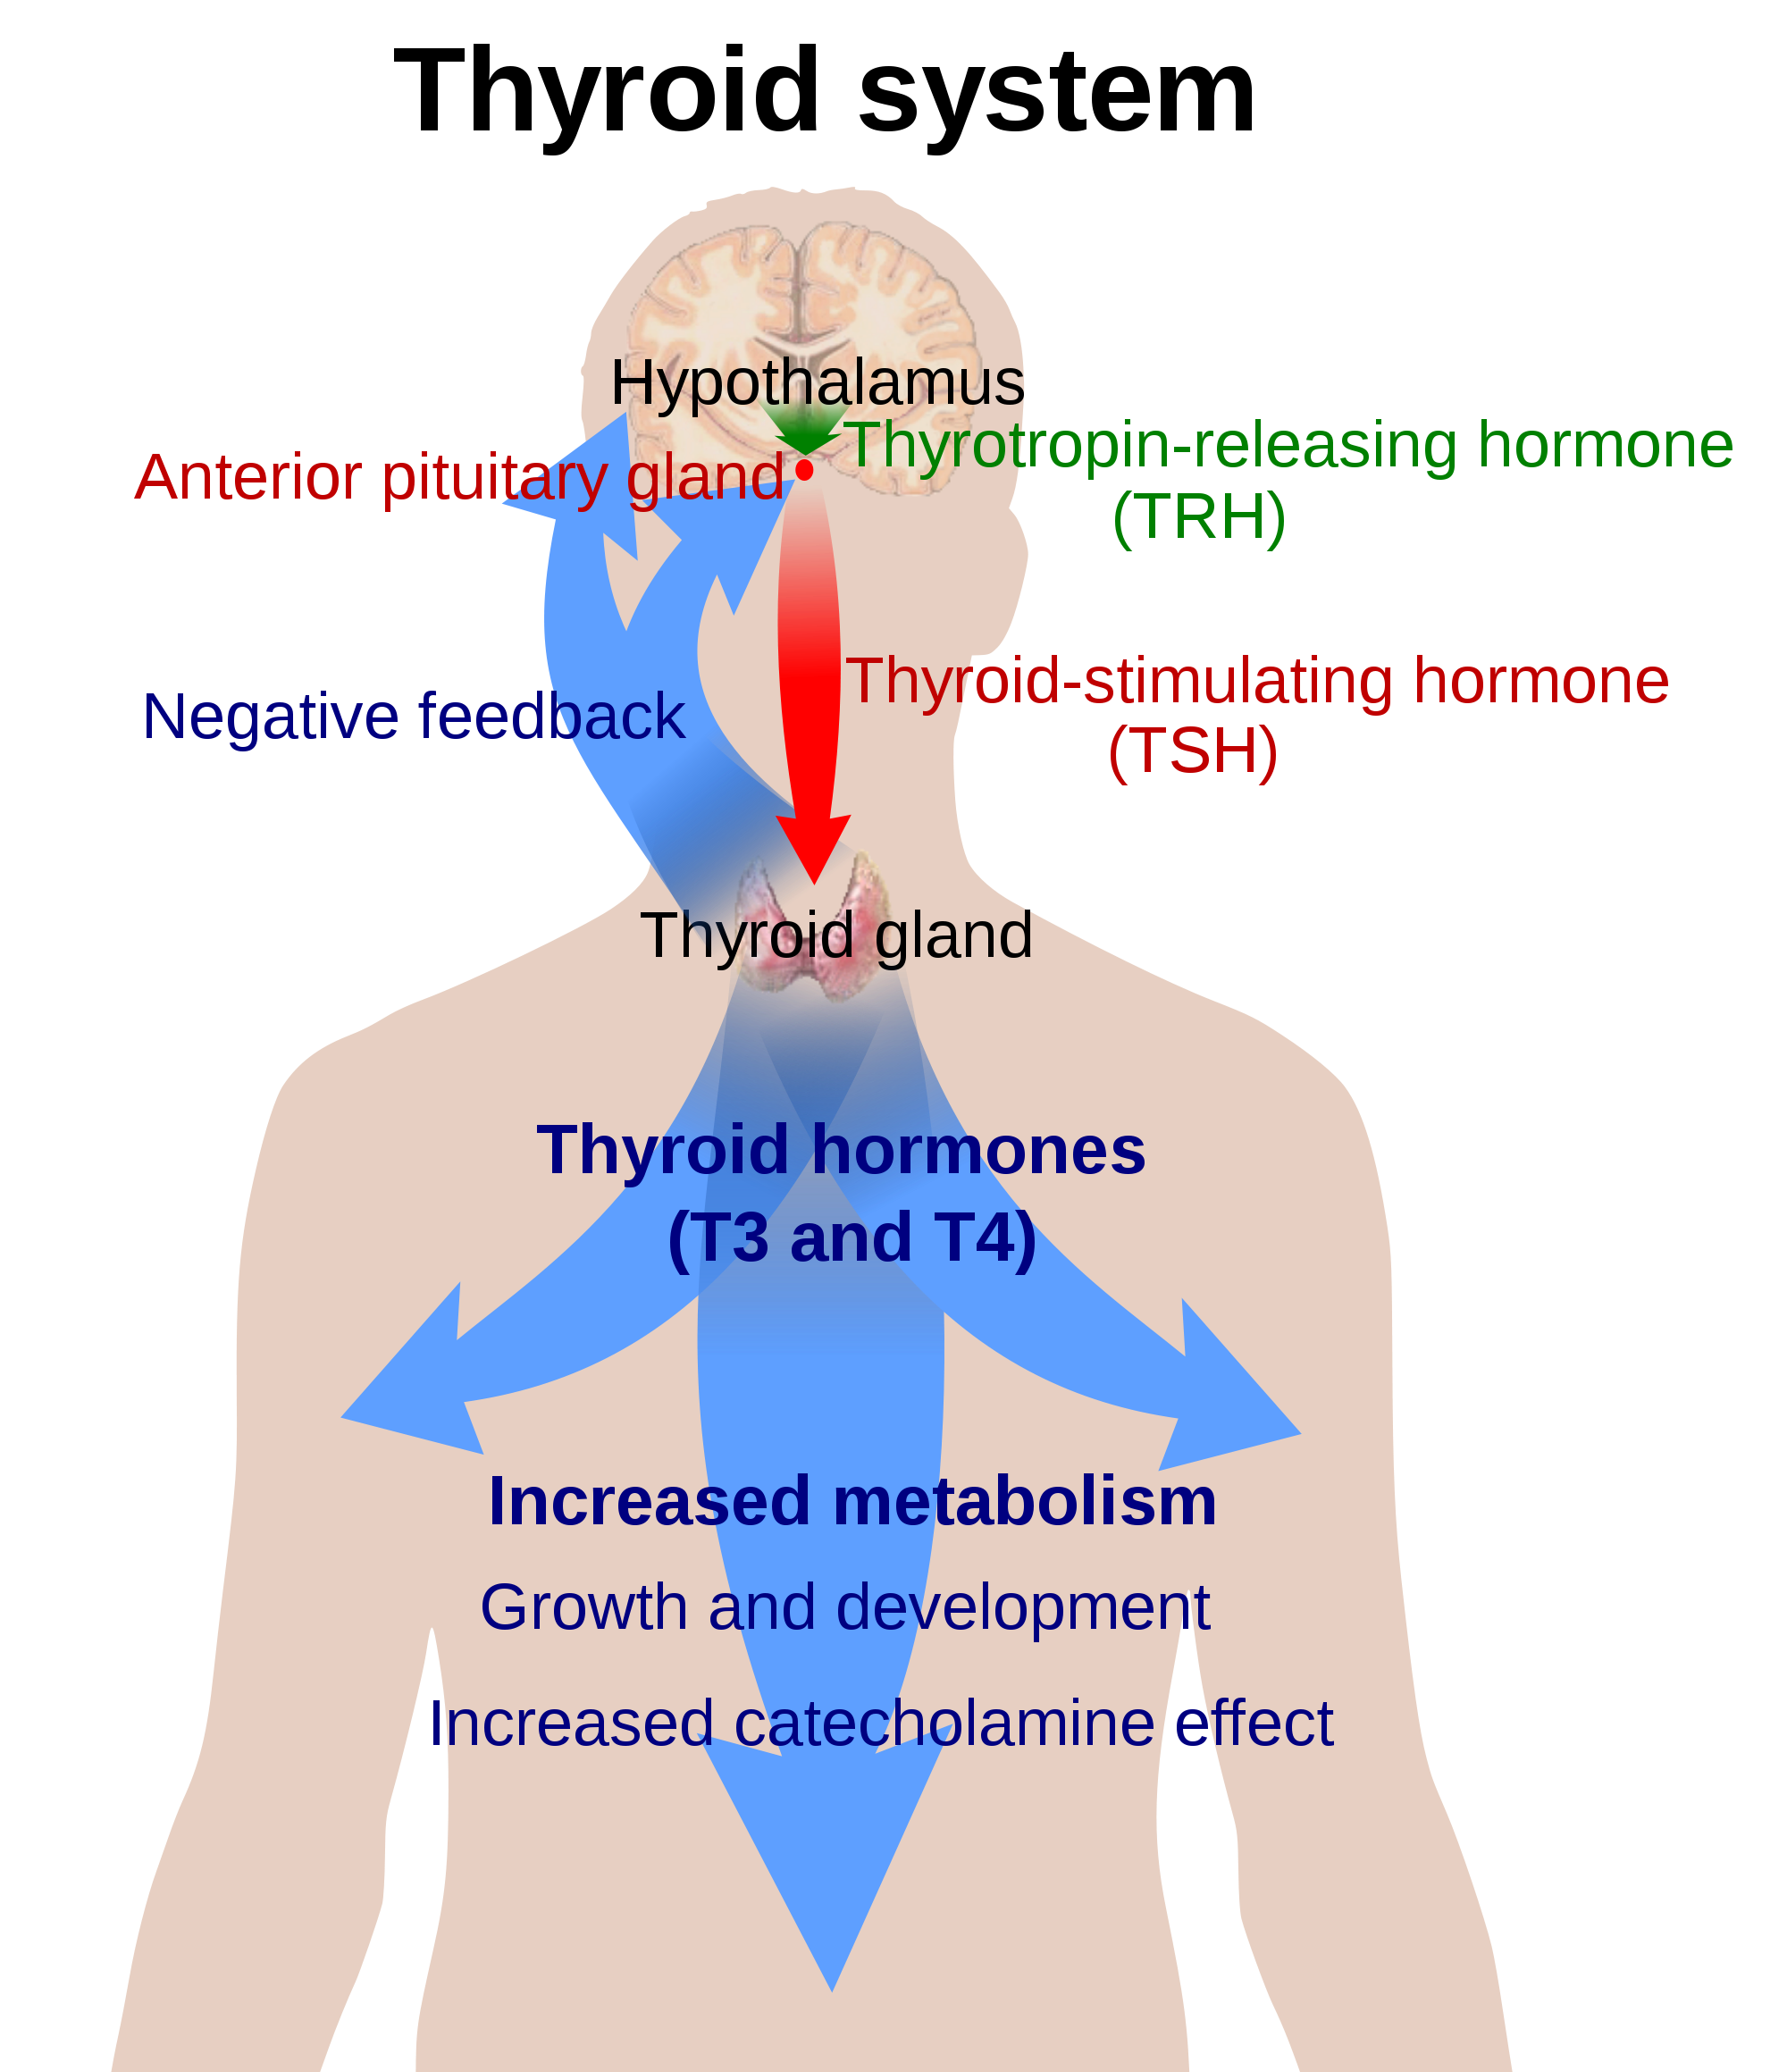 Diagram explaining the workings of the thyroid gland. The pituitary gland stimulates the thyroid to create and secrete thyroid hormone, T3 and T4, which are then sent throughout the body.